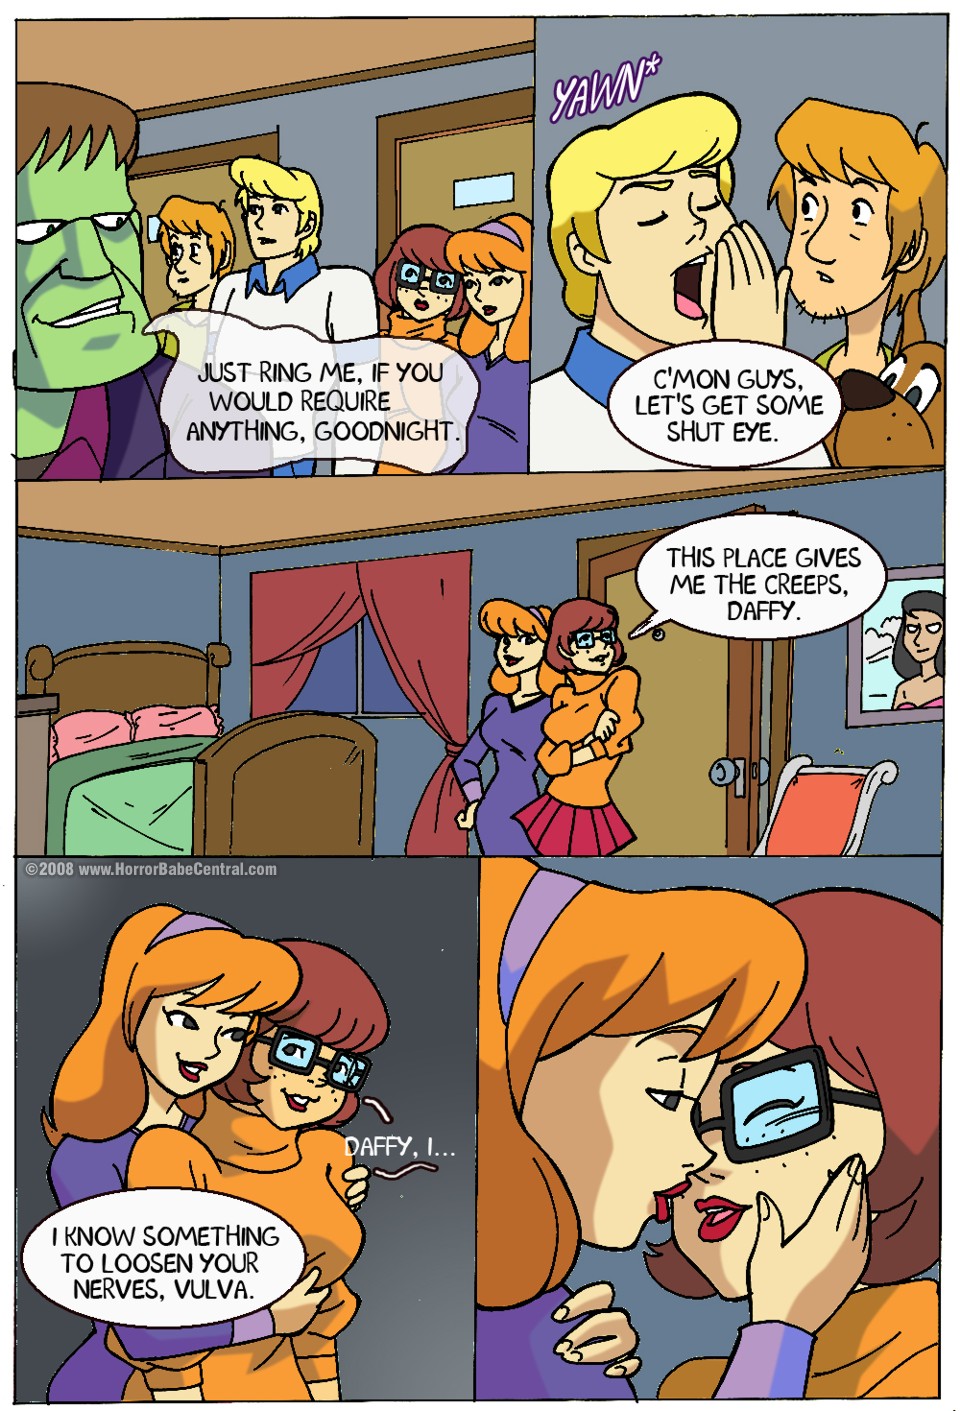 Scooby Doo Daphne Being Fucked Porn Comic - scooby doo porn comics all heroes in action 1 - XXXPicz